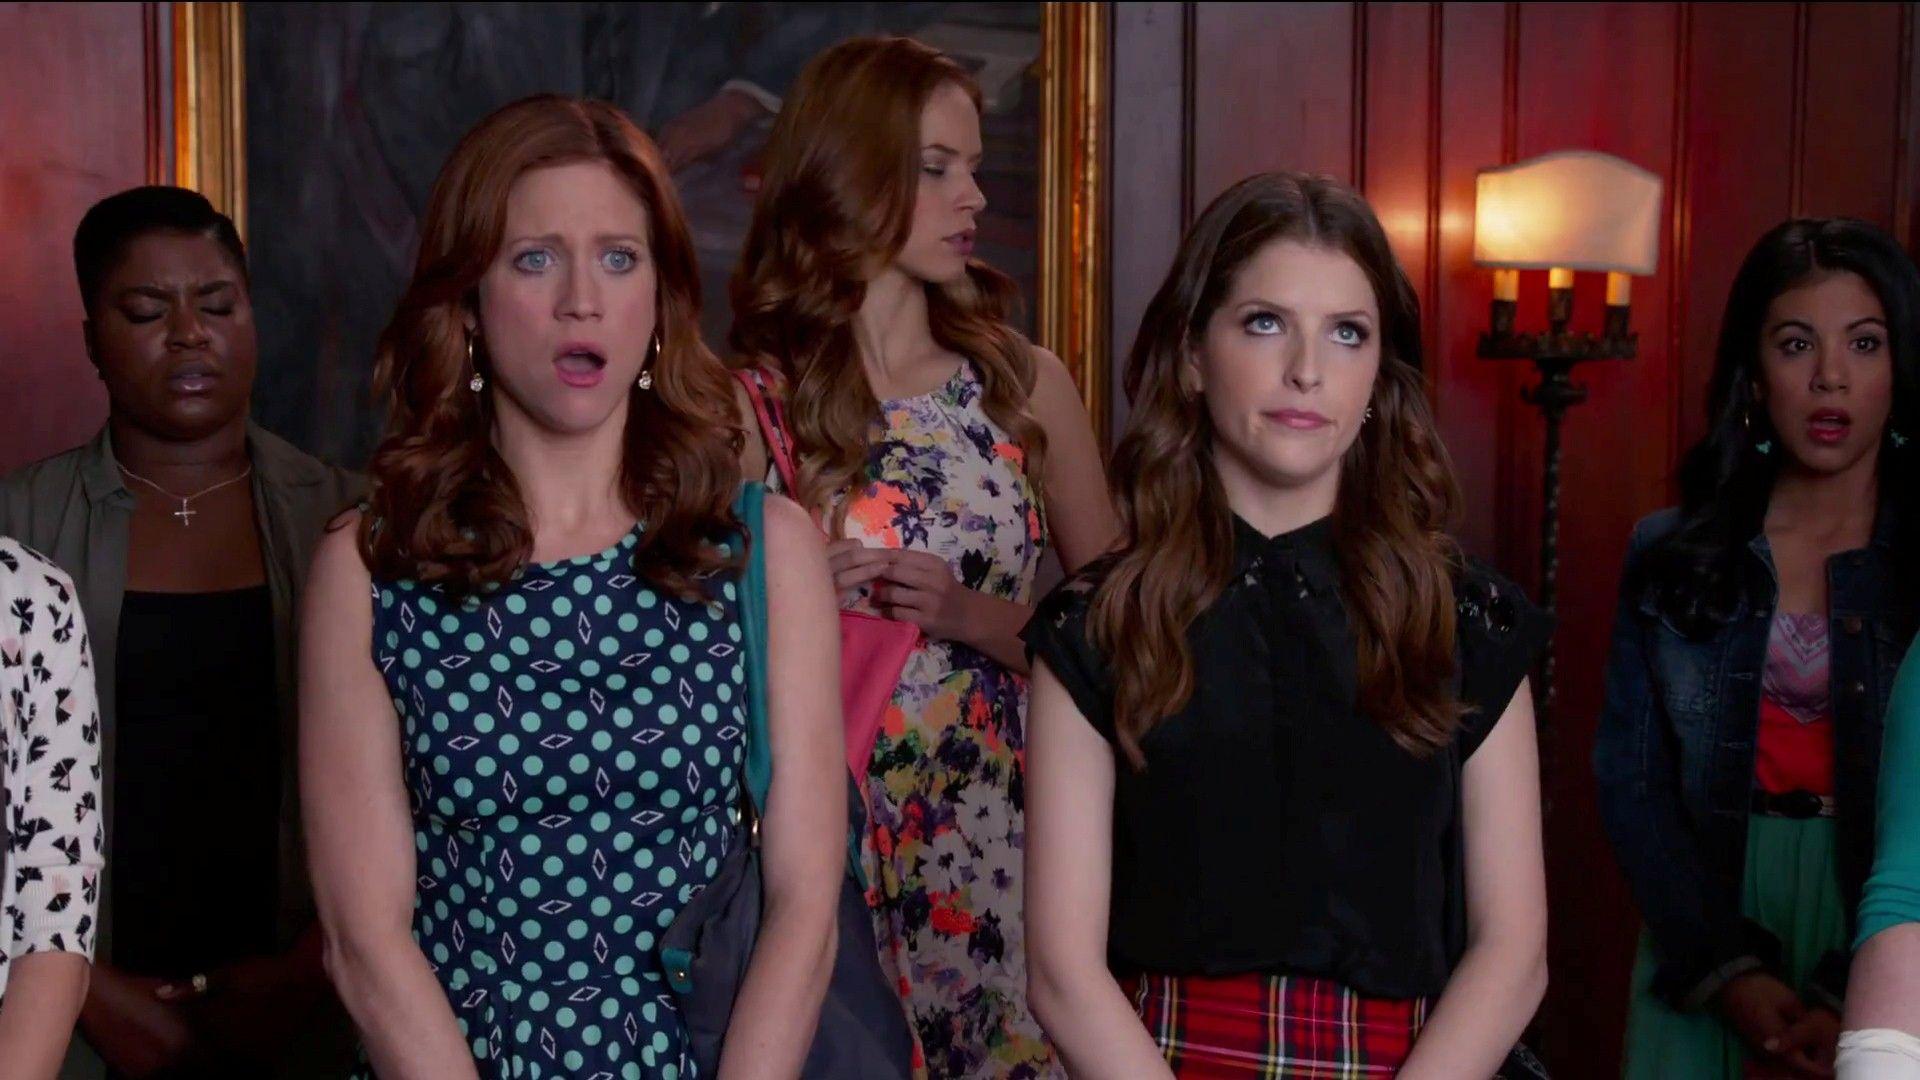 Anna Kendrick in Pitch Perfect 2 Latest Hollywood Film Wallpapers.